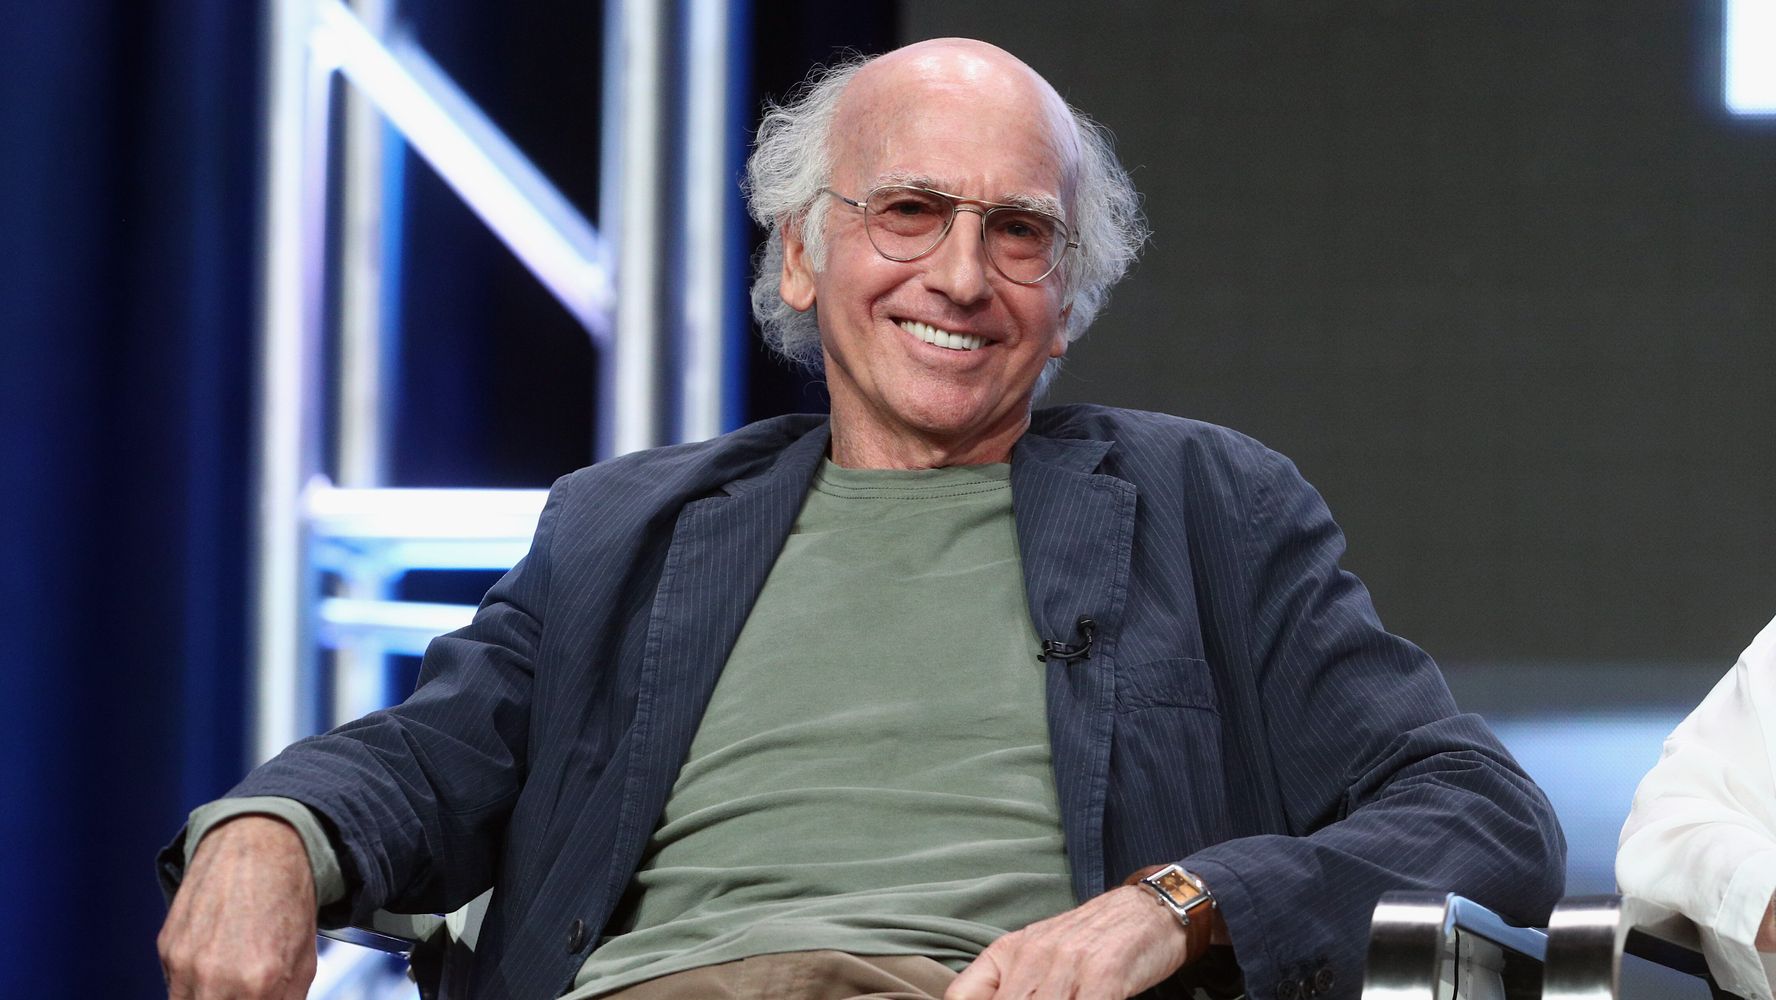 Larry David Was Hilariously On-Brand When He Was Disinvited To Obama’s Birthday